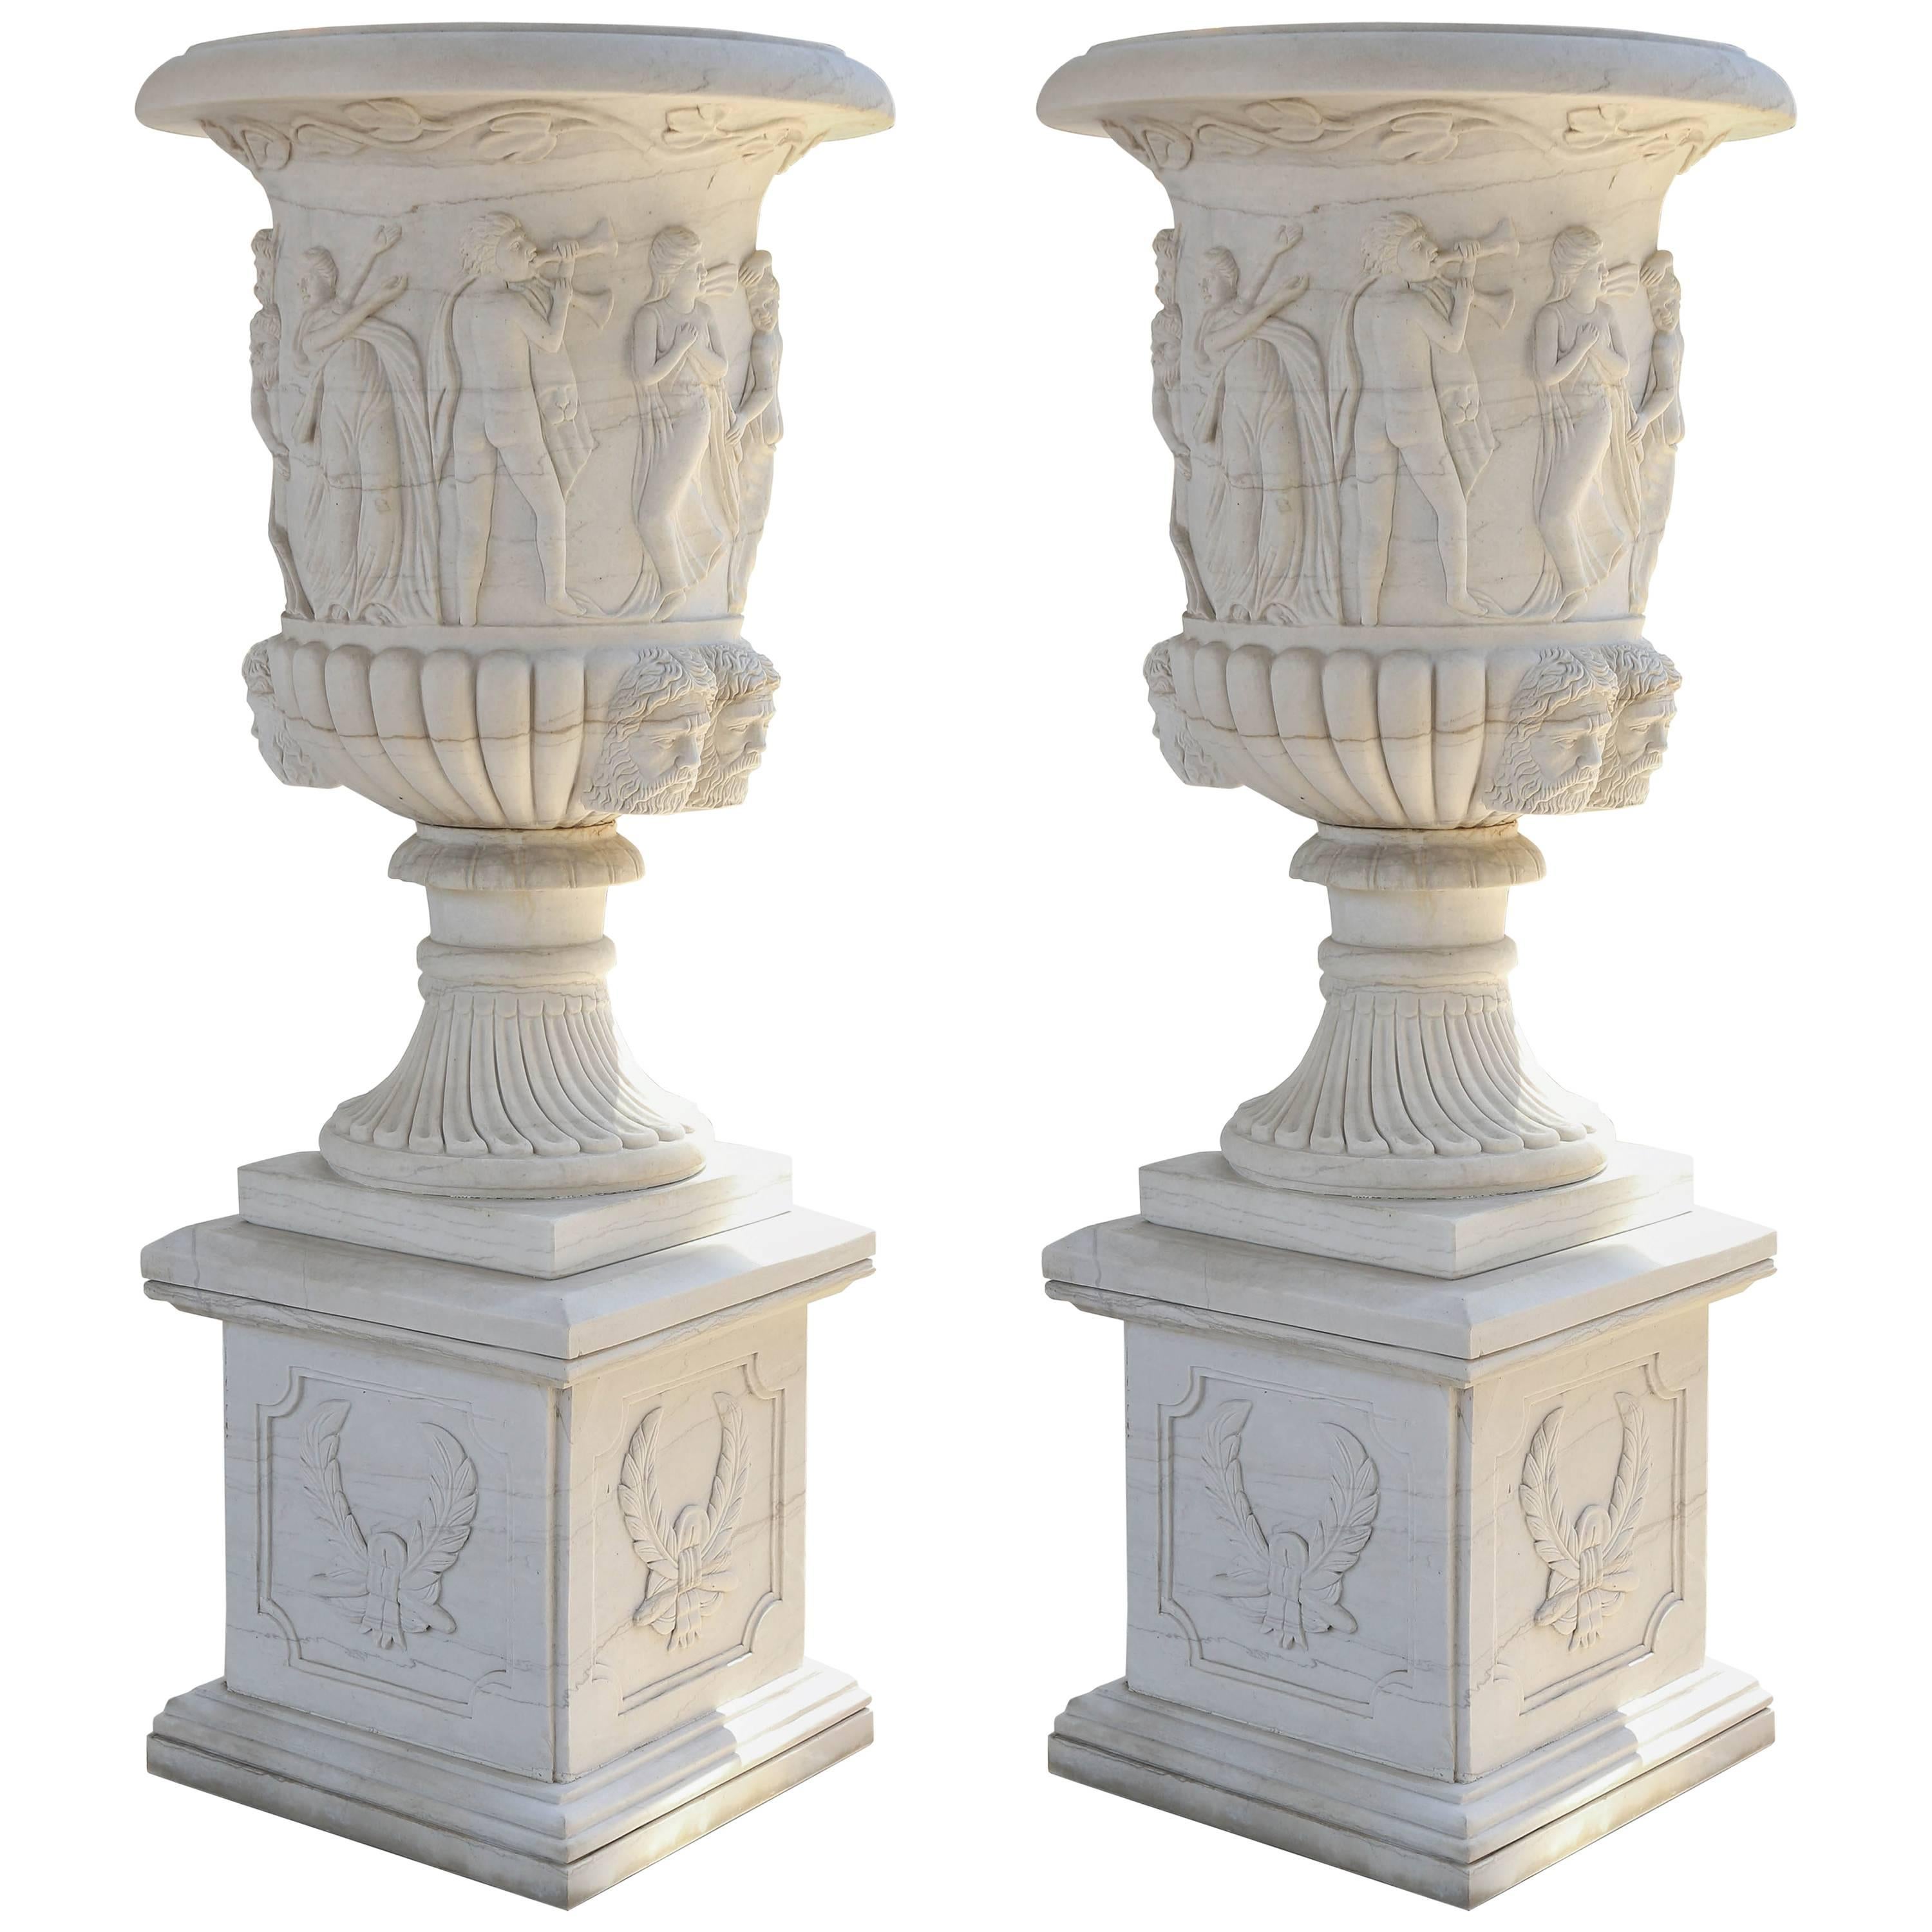 Pair of Monumental Garden Planters Made of Carved Carrara Marble